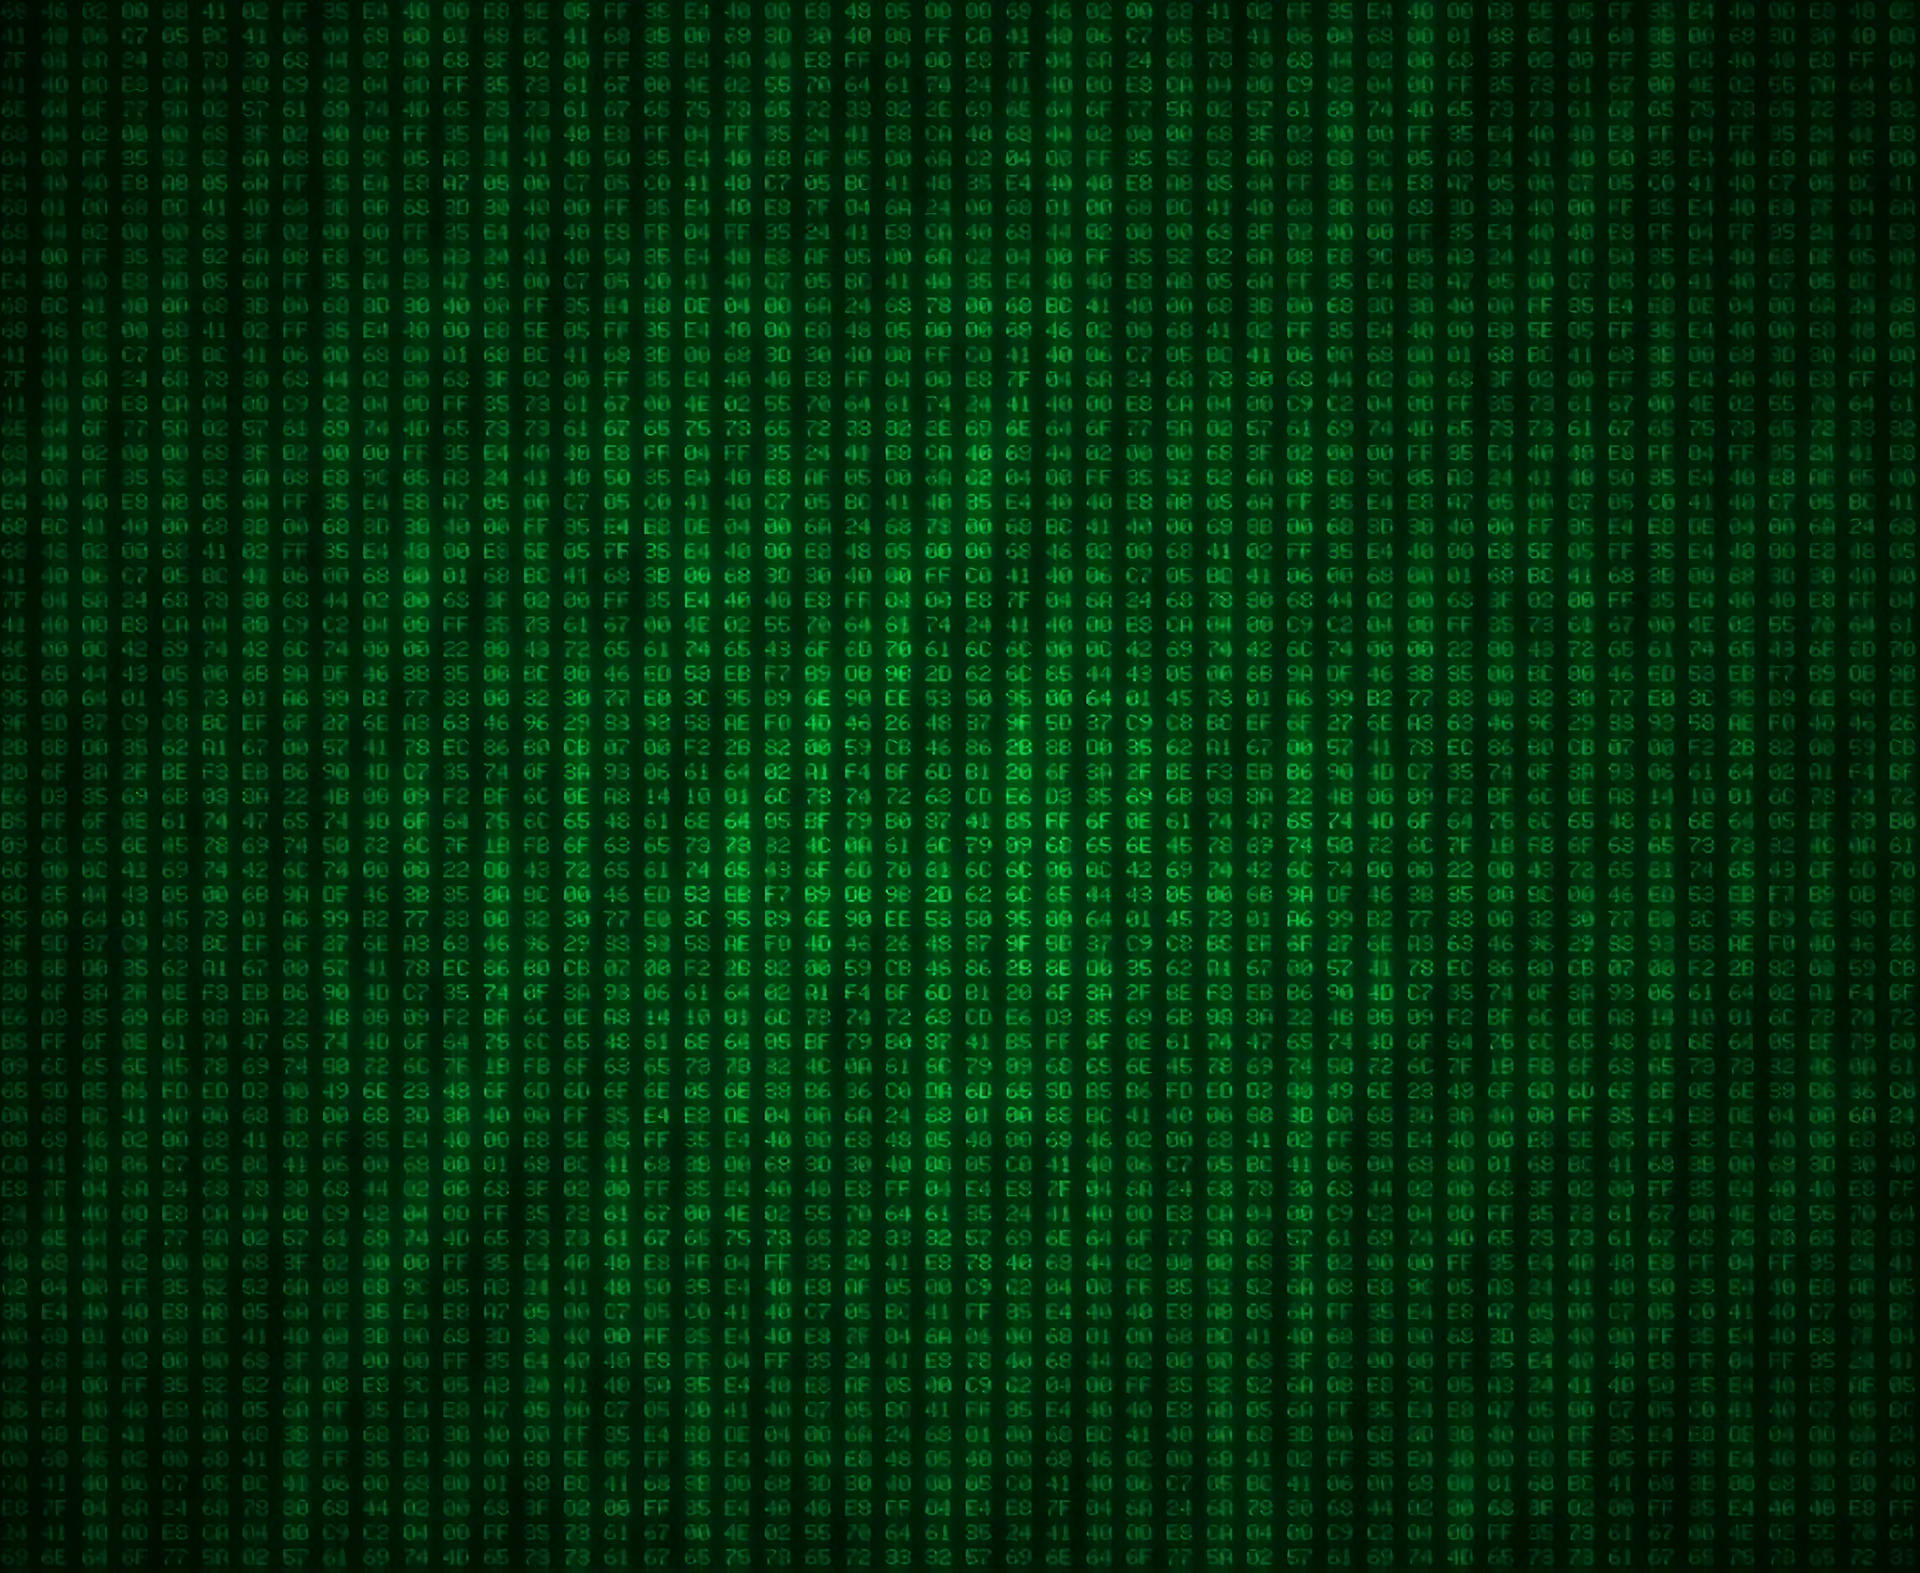 Hexadecimal Code, Numeral System, Numerals, Code, Hex, Green